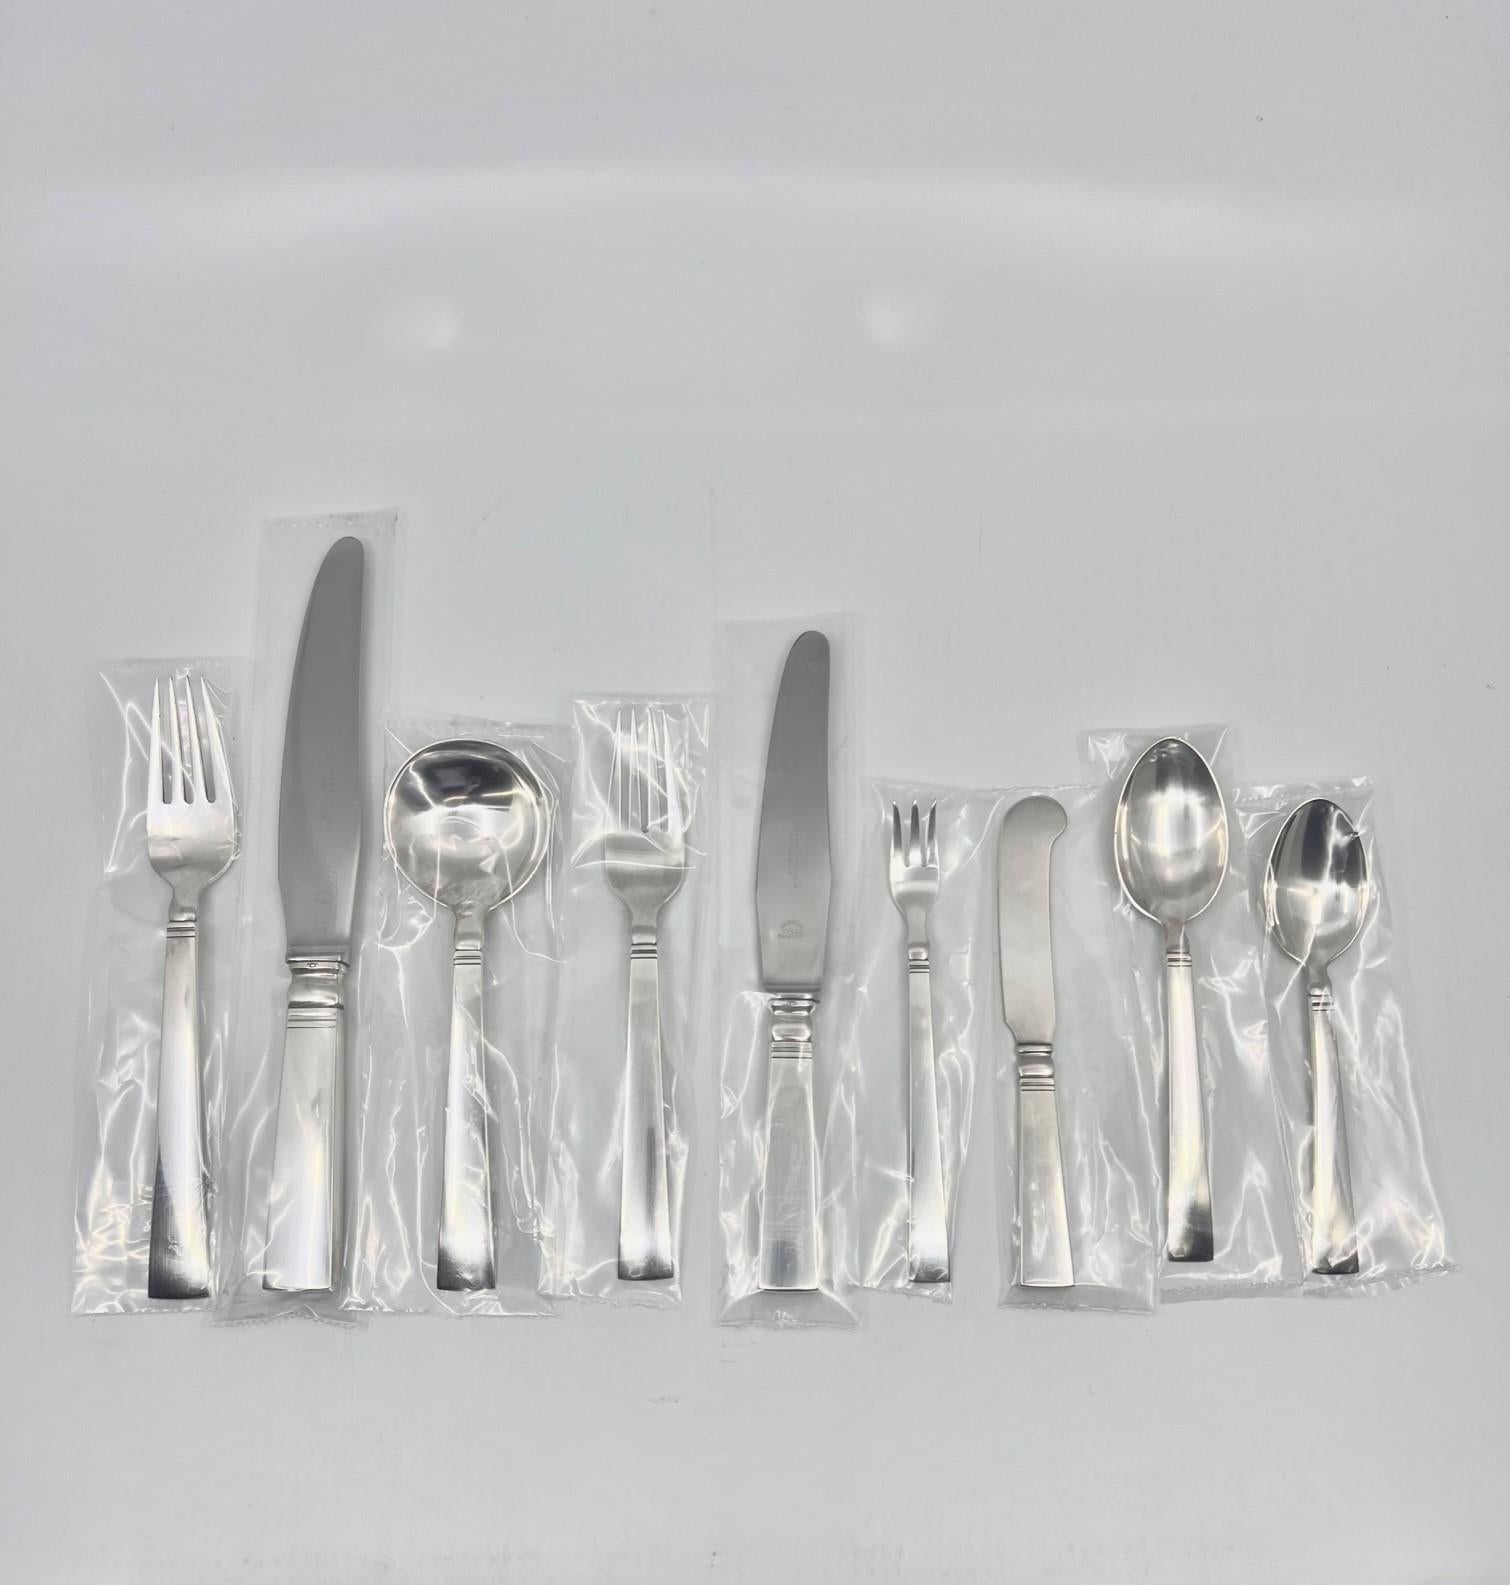 A Georg Jensen sterling silverware service in the Acadia pattern, design #46 by Ib Just Andersen from 1934.
This service includes 12 settings of 9 pieces.

12 Round Spoons (6 1/4″: 15.9cm)
12 Dinner Forks (7 1/8″: 18.2cm)
12 Dinner Knives (9″: